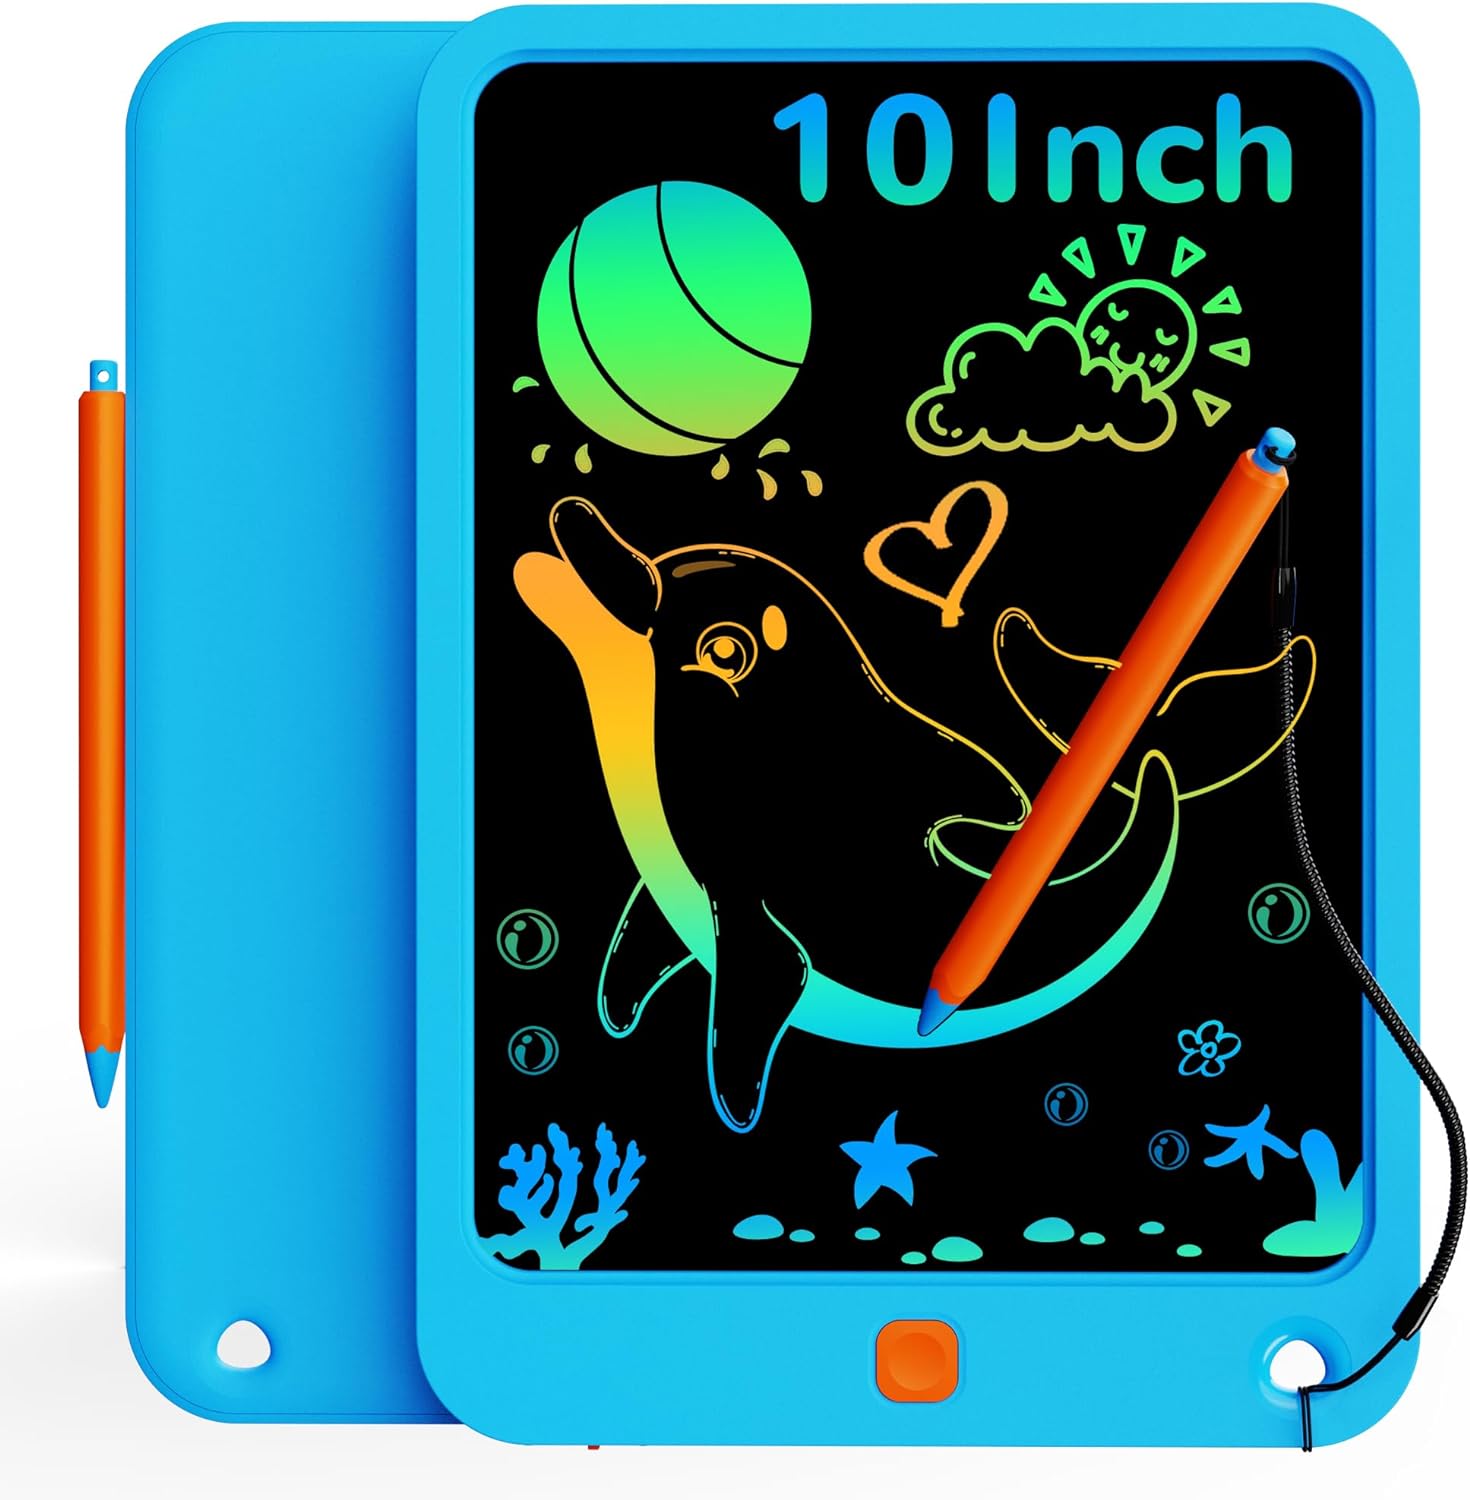 KOKODI LCD Writing Tablet for Kids 10 Inch, Toys for 3 4 5 6 7 8 9 10 Years Old Boys and Girls, Colorful Doodle Board, Gift for Toddler Age 3-12 Years, Memo Board, Drawing Pads with Magnetic Pen